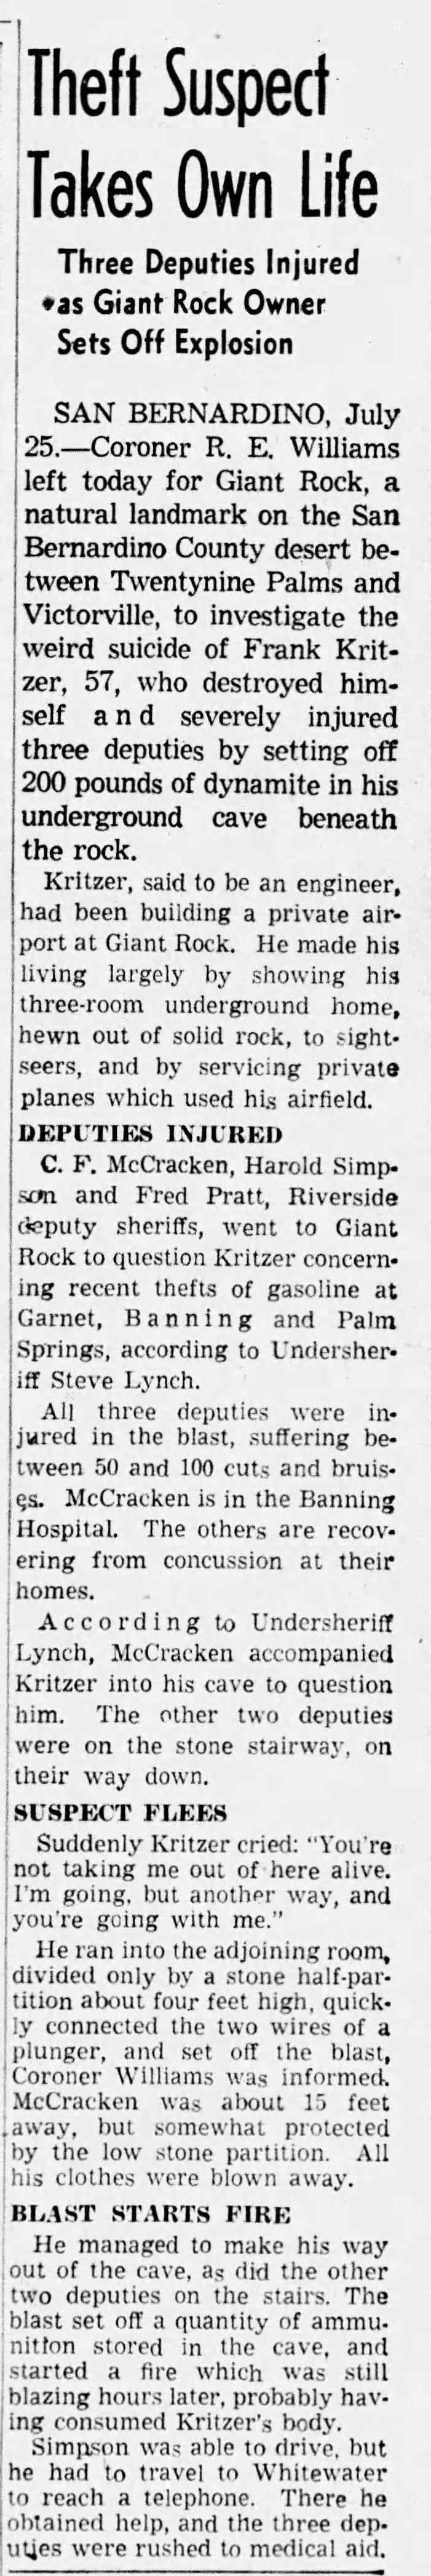 Giant Rock details from LA Times, 26 July 1942